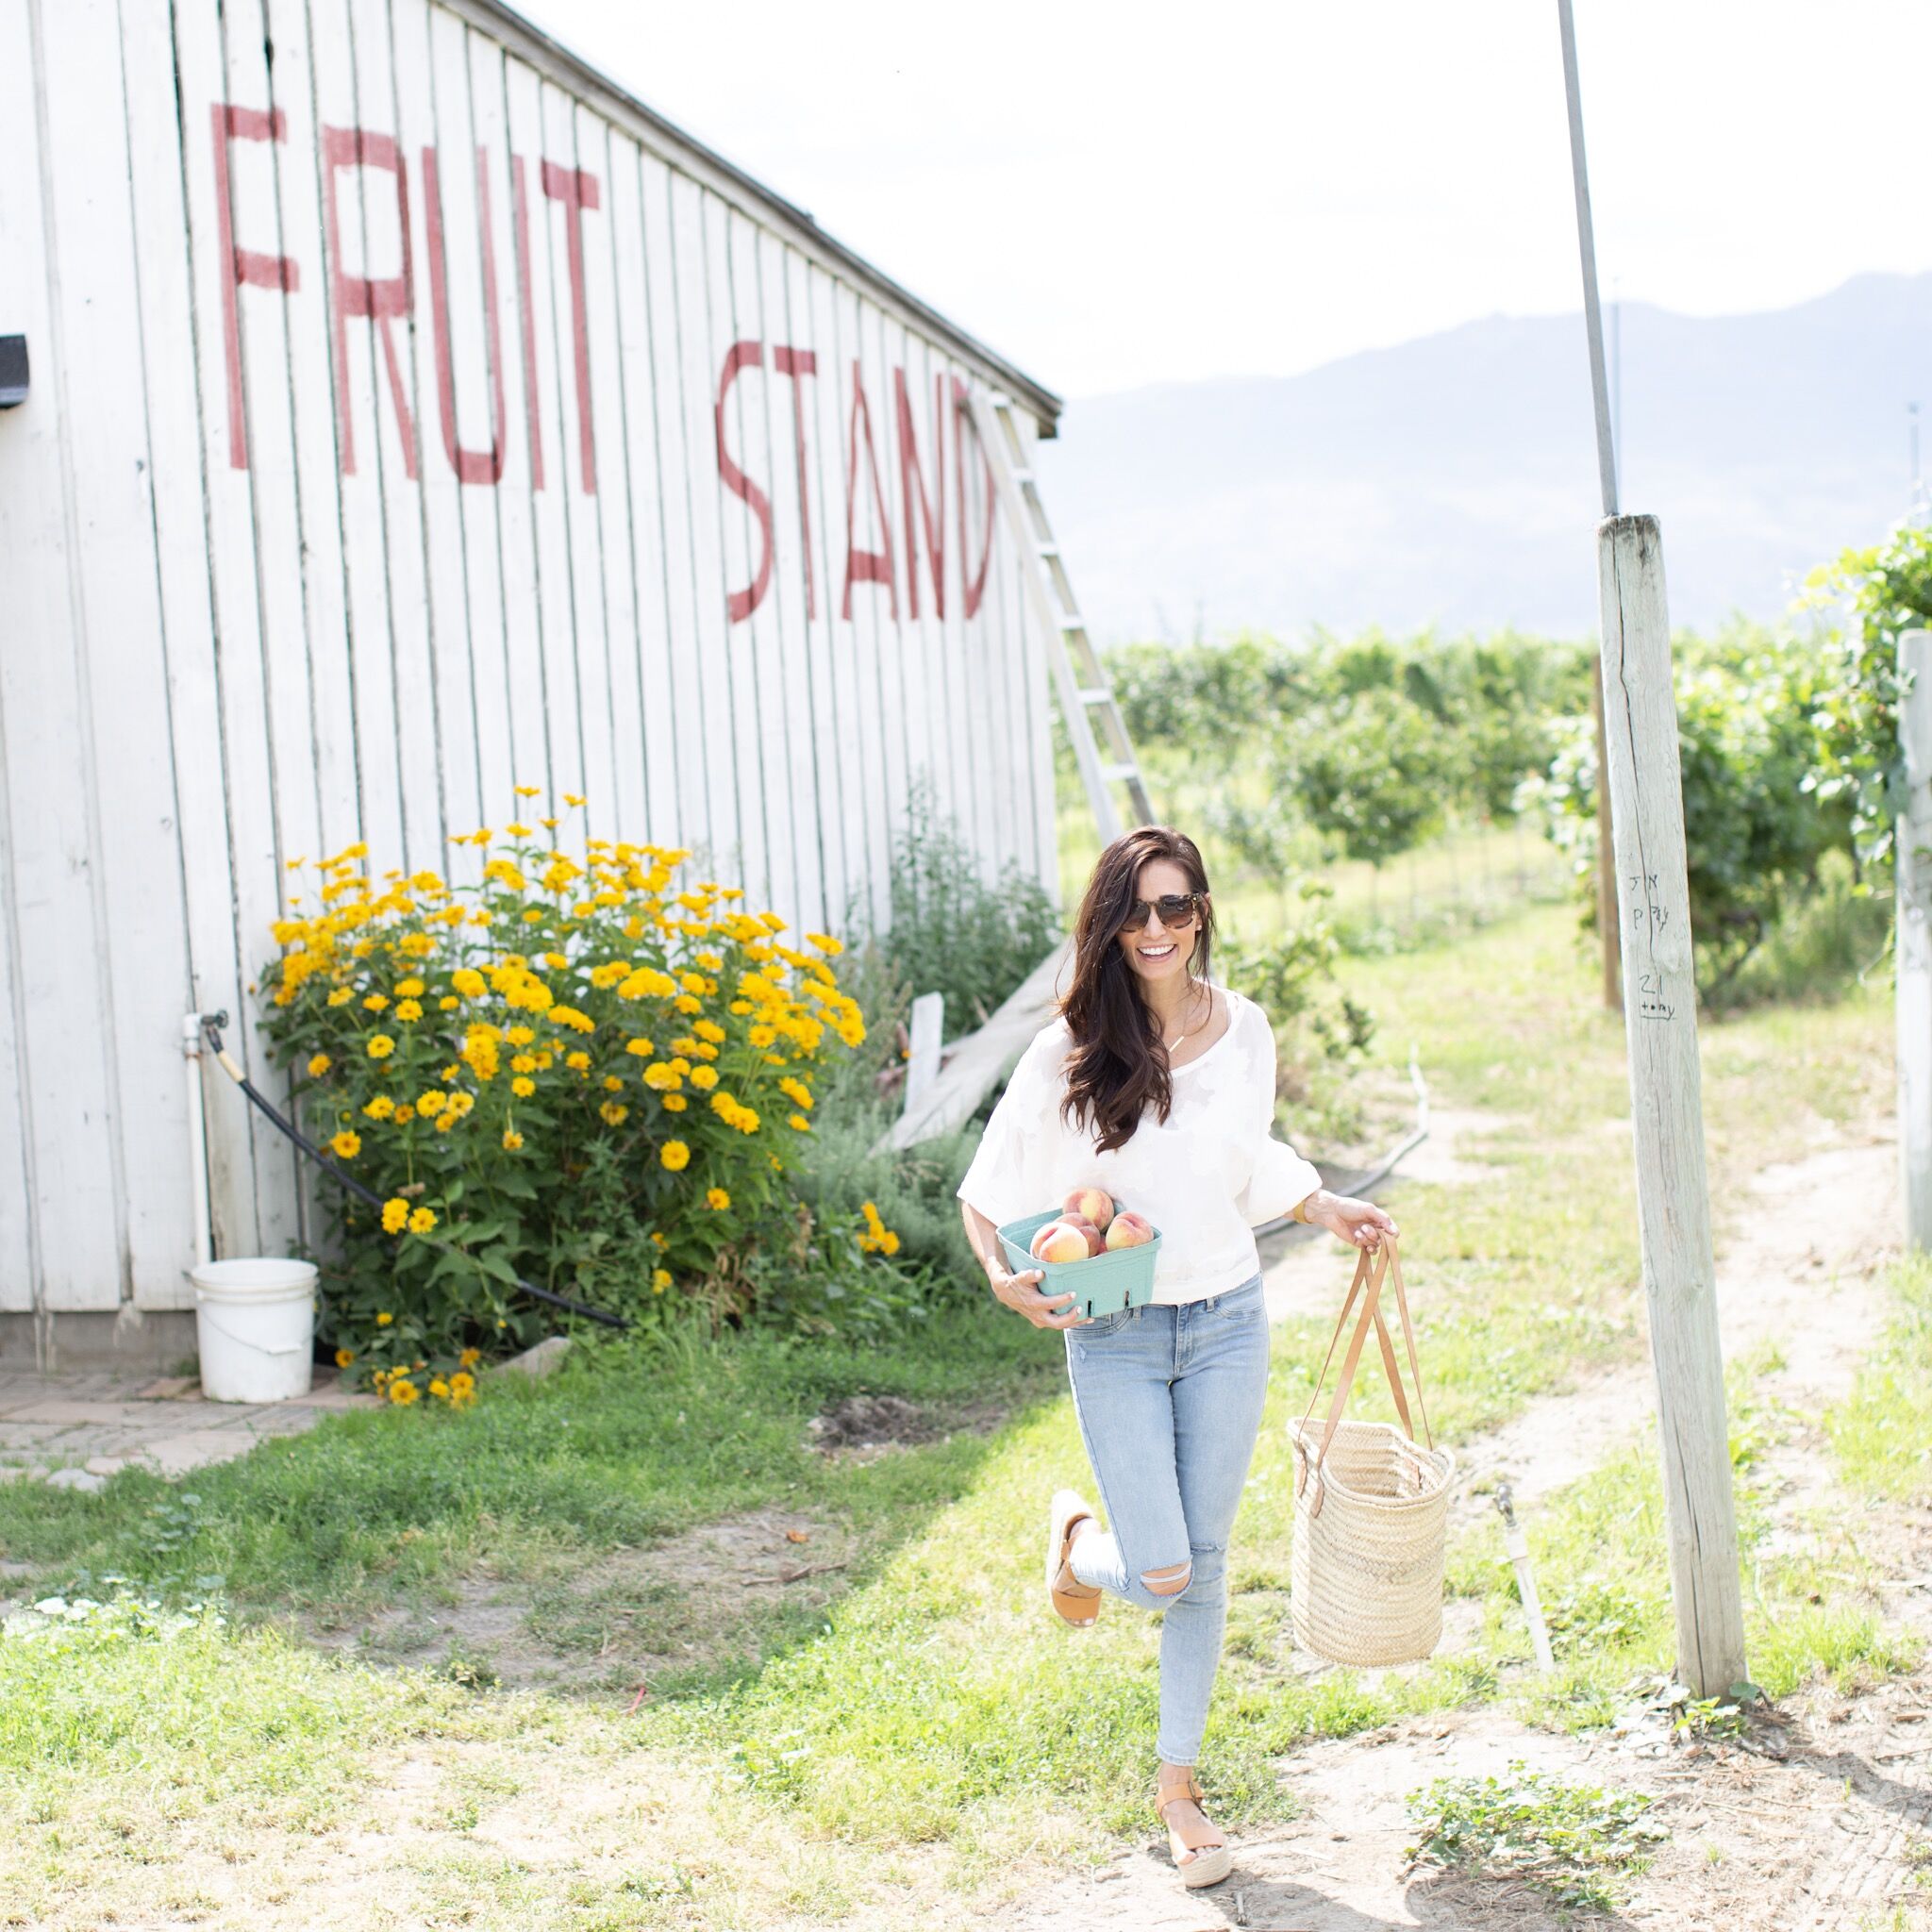 Kelowna Summer Travel Guide including where to eat, where to pick fruit, what to do and the best wineries to visit!